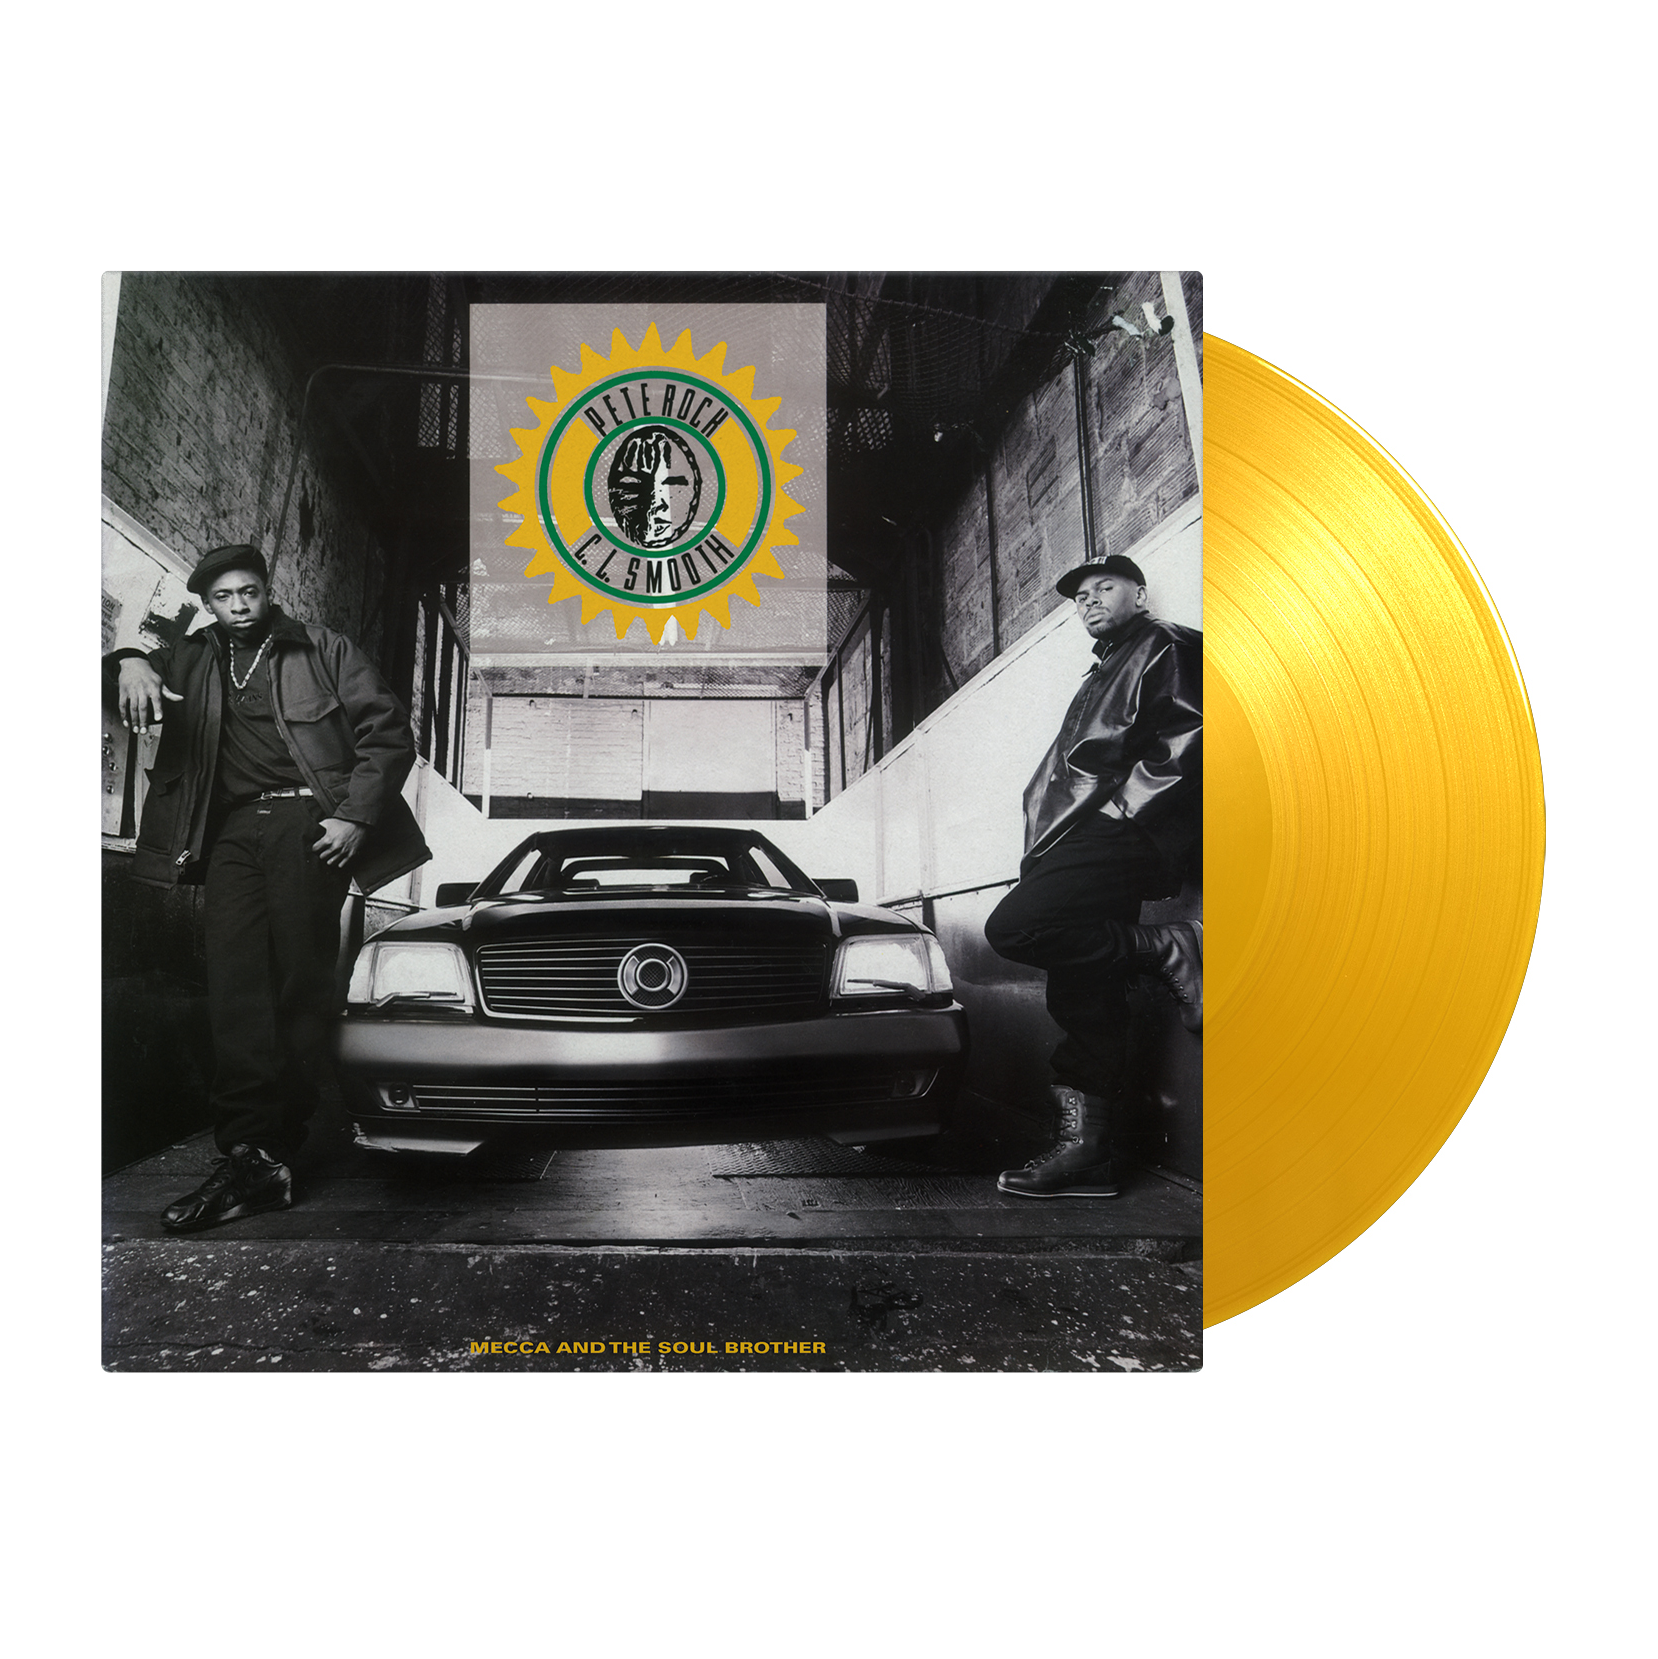 Pete Rock & C.L Smooth - Mecca and The Soul Brother: Limited Translucent Yellow Vinyl 2LP